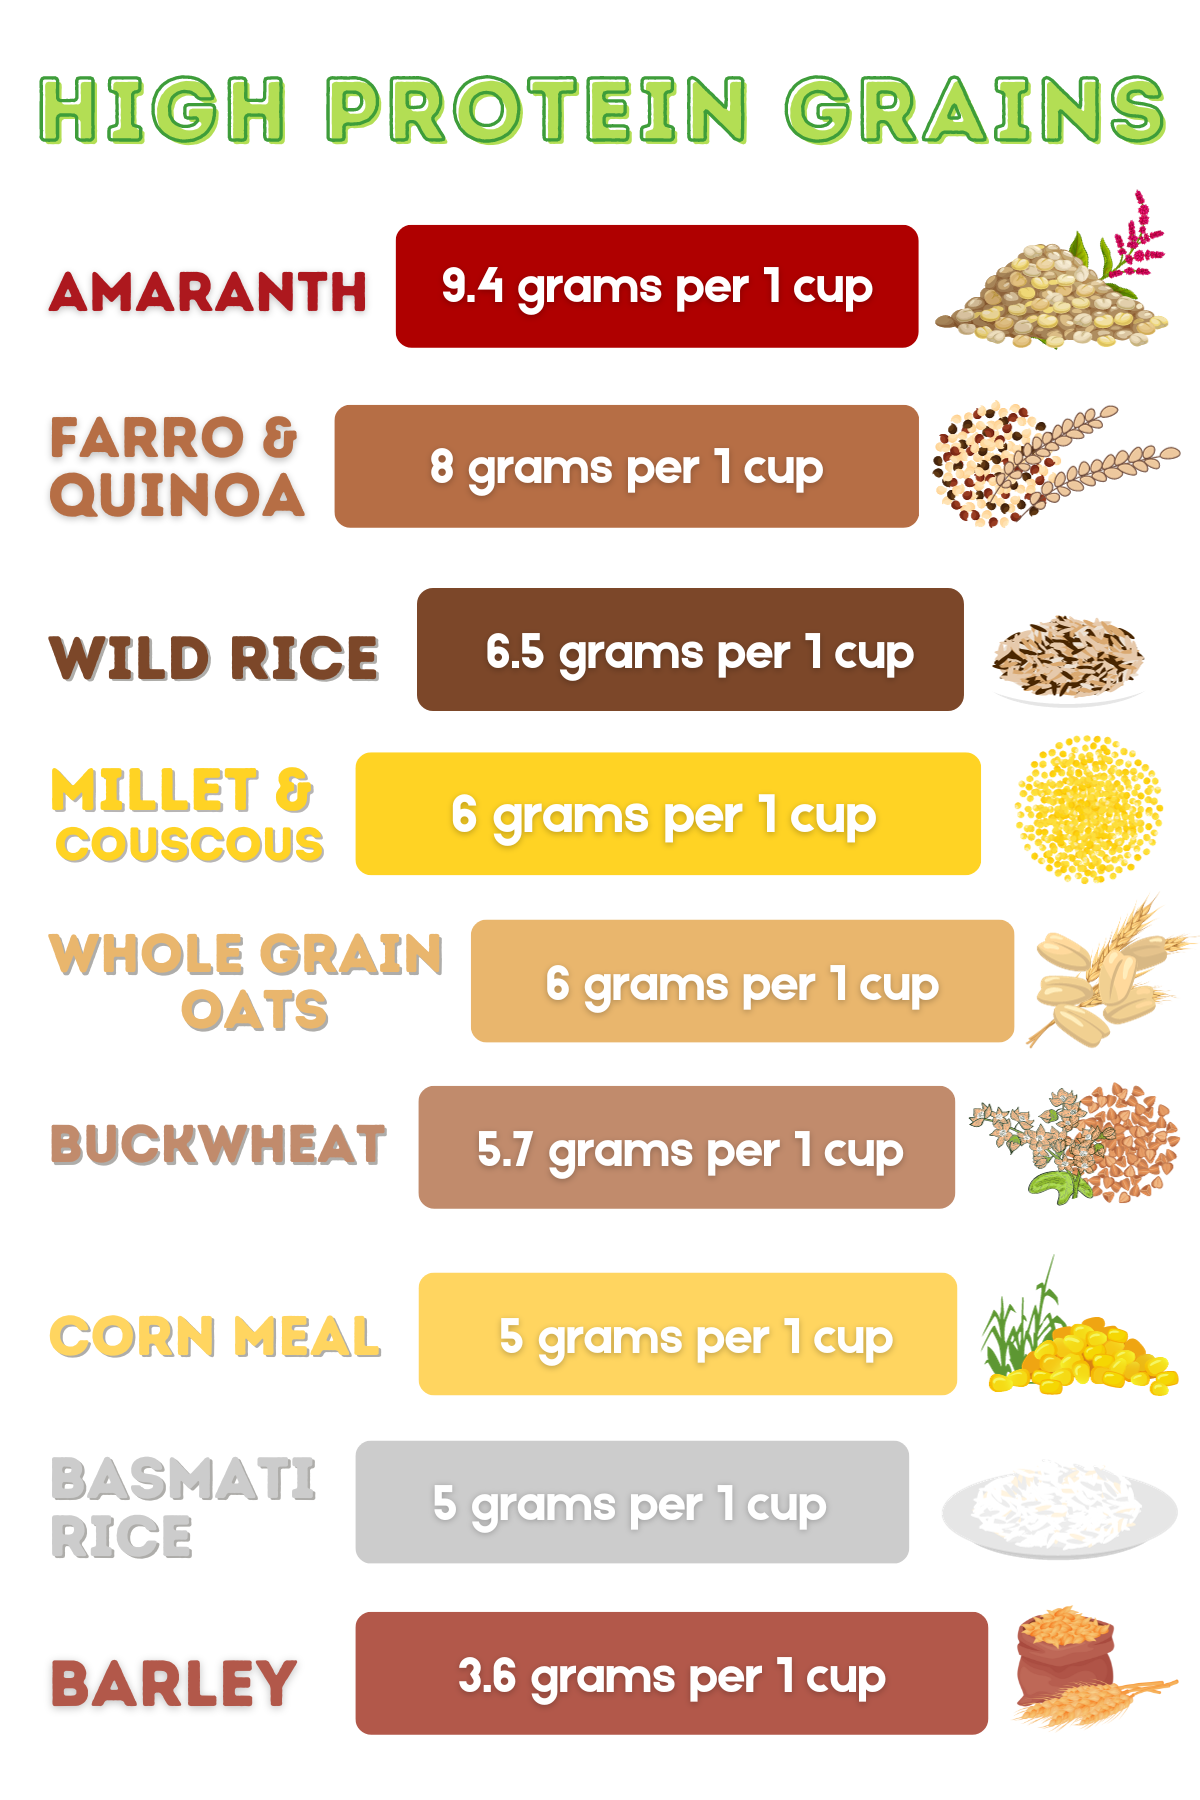 High protein grains infographic.